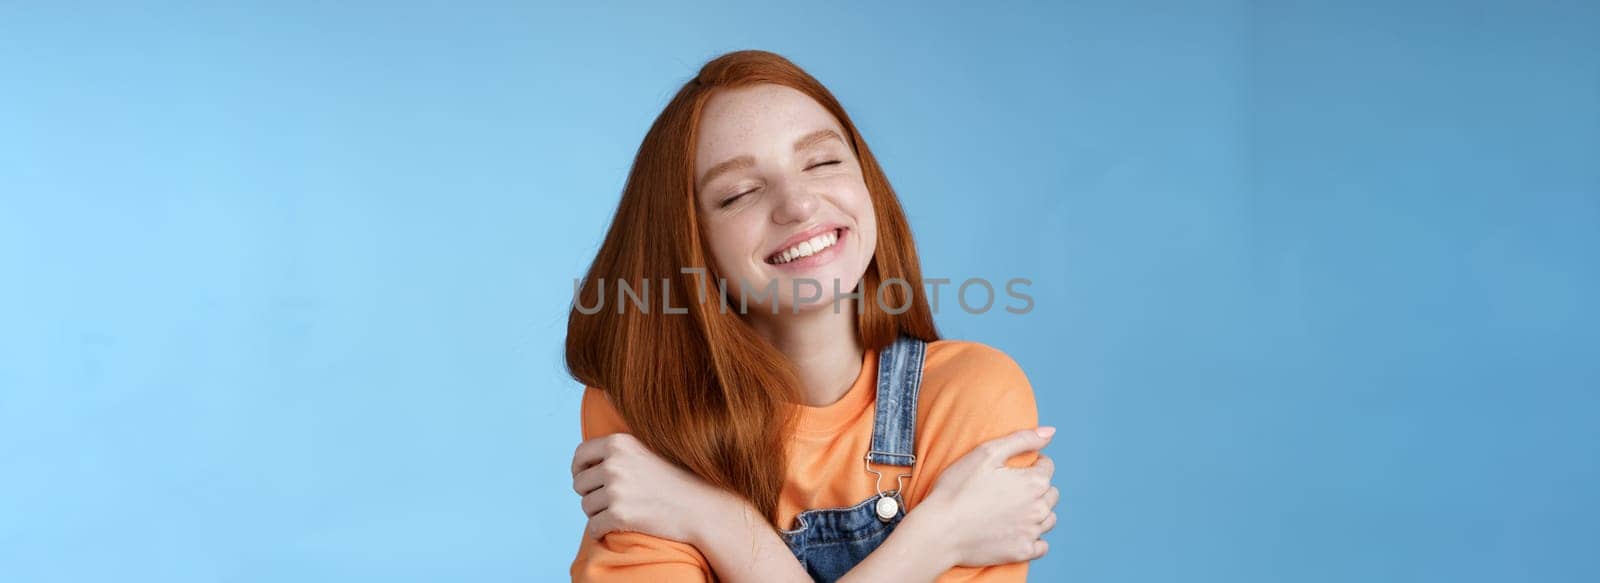 Lifestyle. Close-up dreamy happy smiling redhead girl close eyes fantasizing romantic date grinning white teeth cuddle herself cross arms chest embracing recalling lovely memories hugging daydreaming.